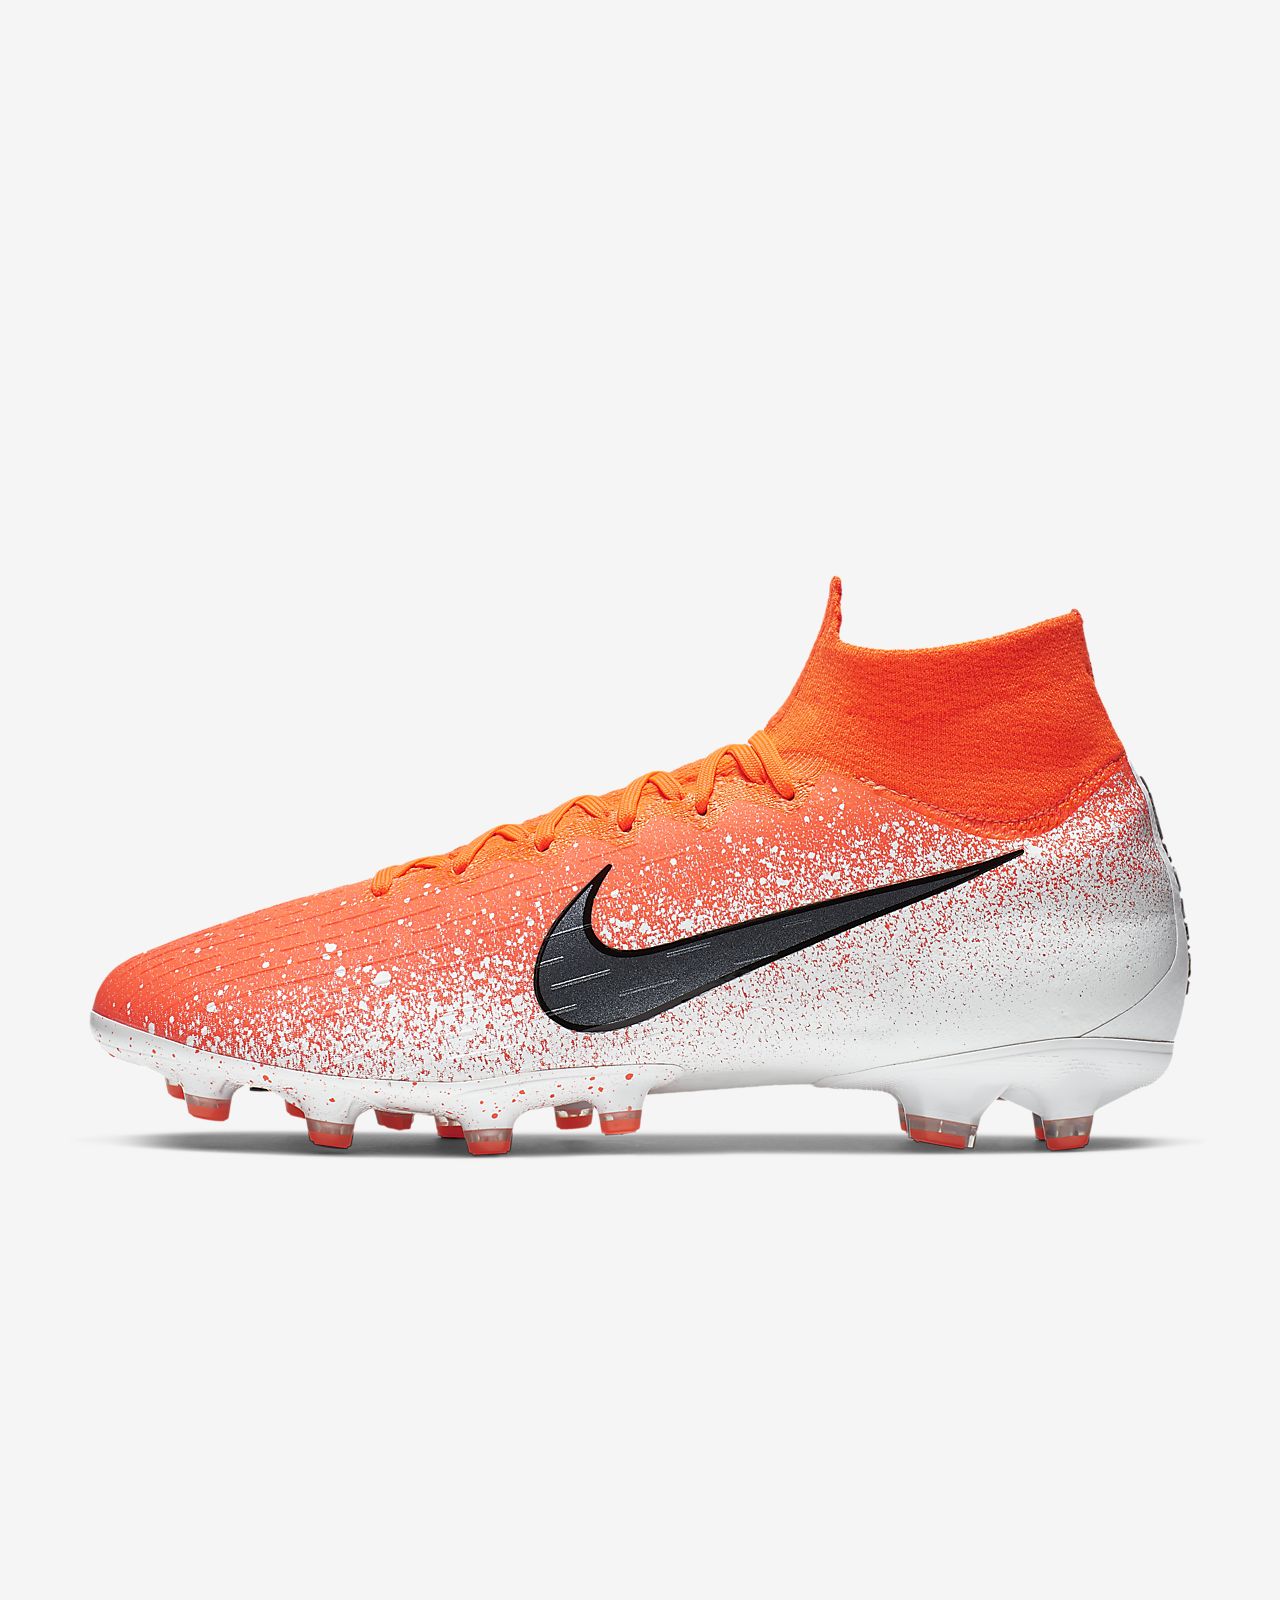 Buy your pair of the Nike Mercurial Superfly CR7 Quinto